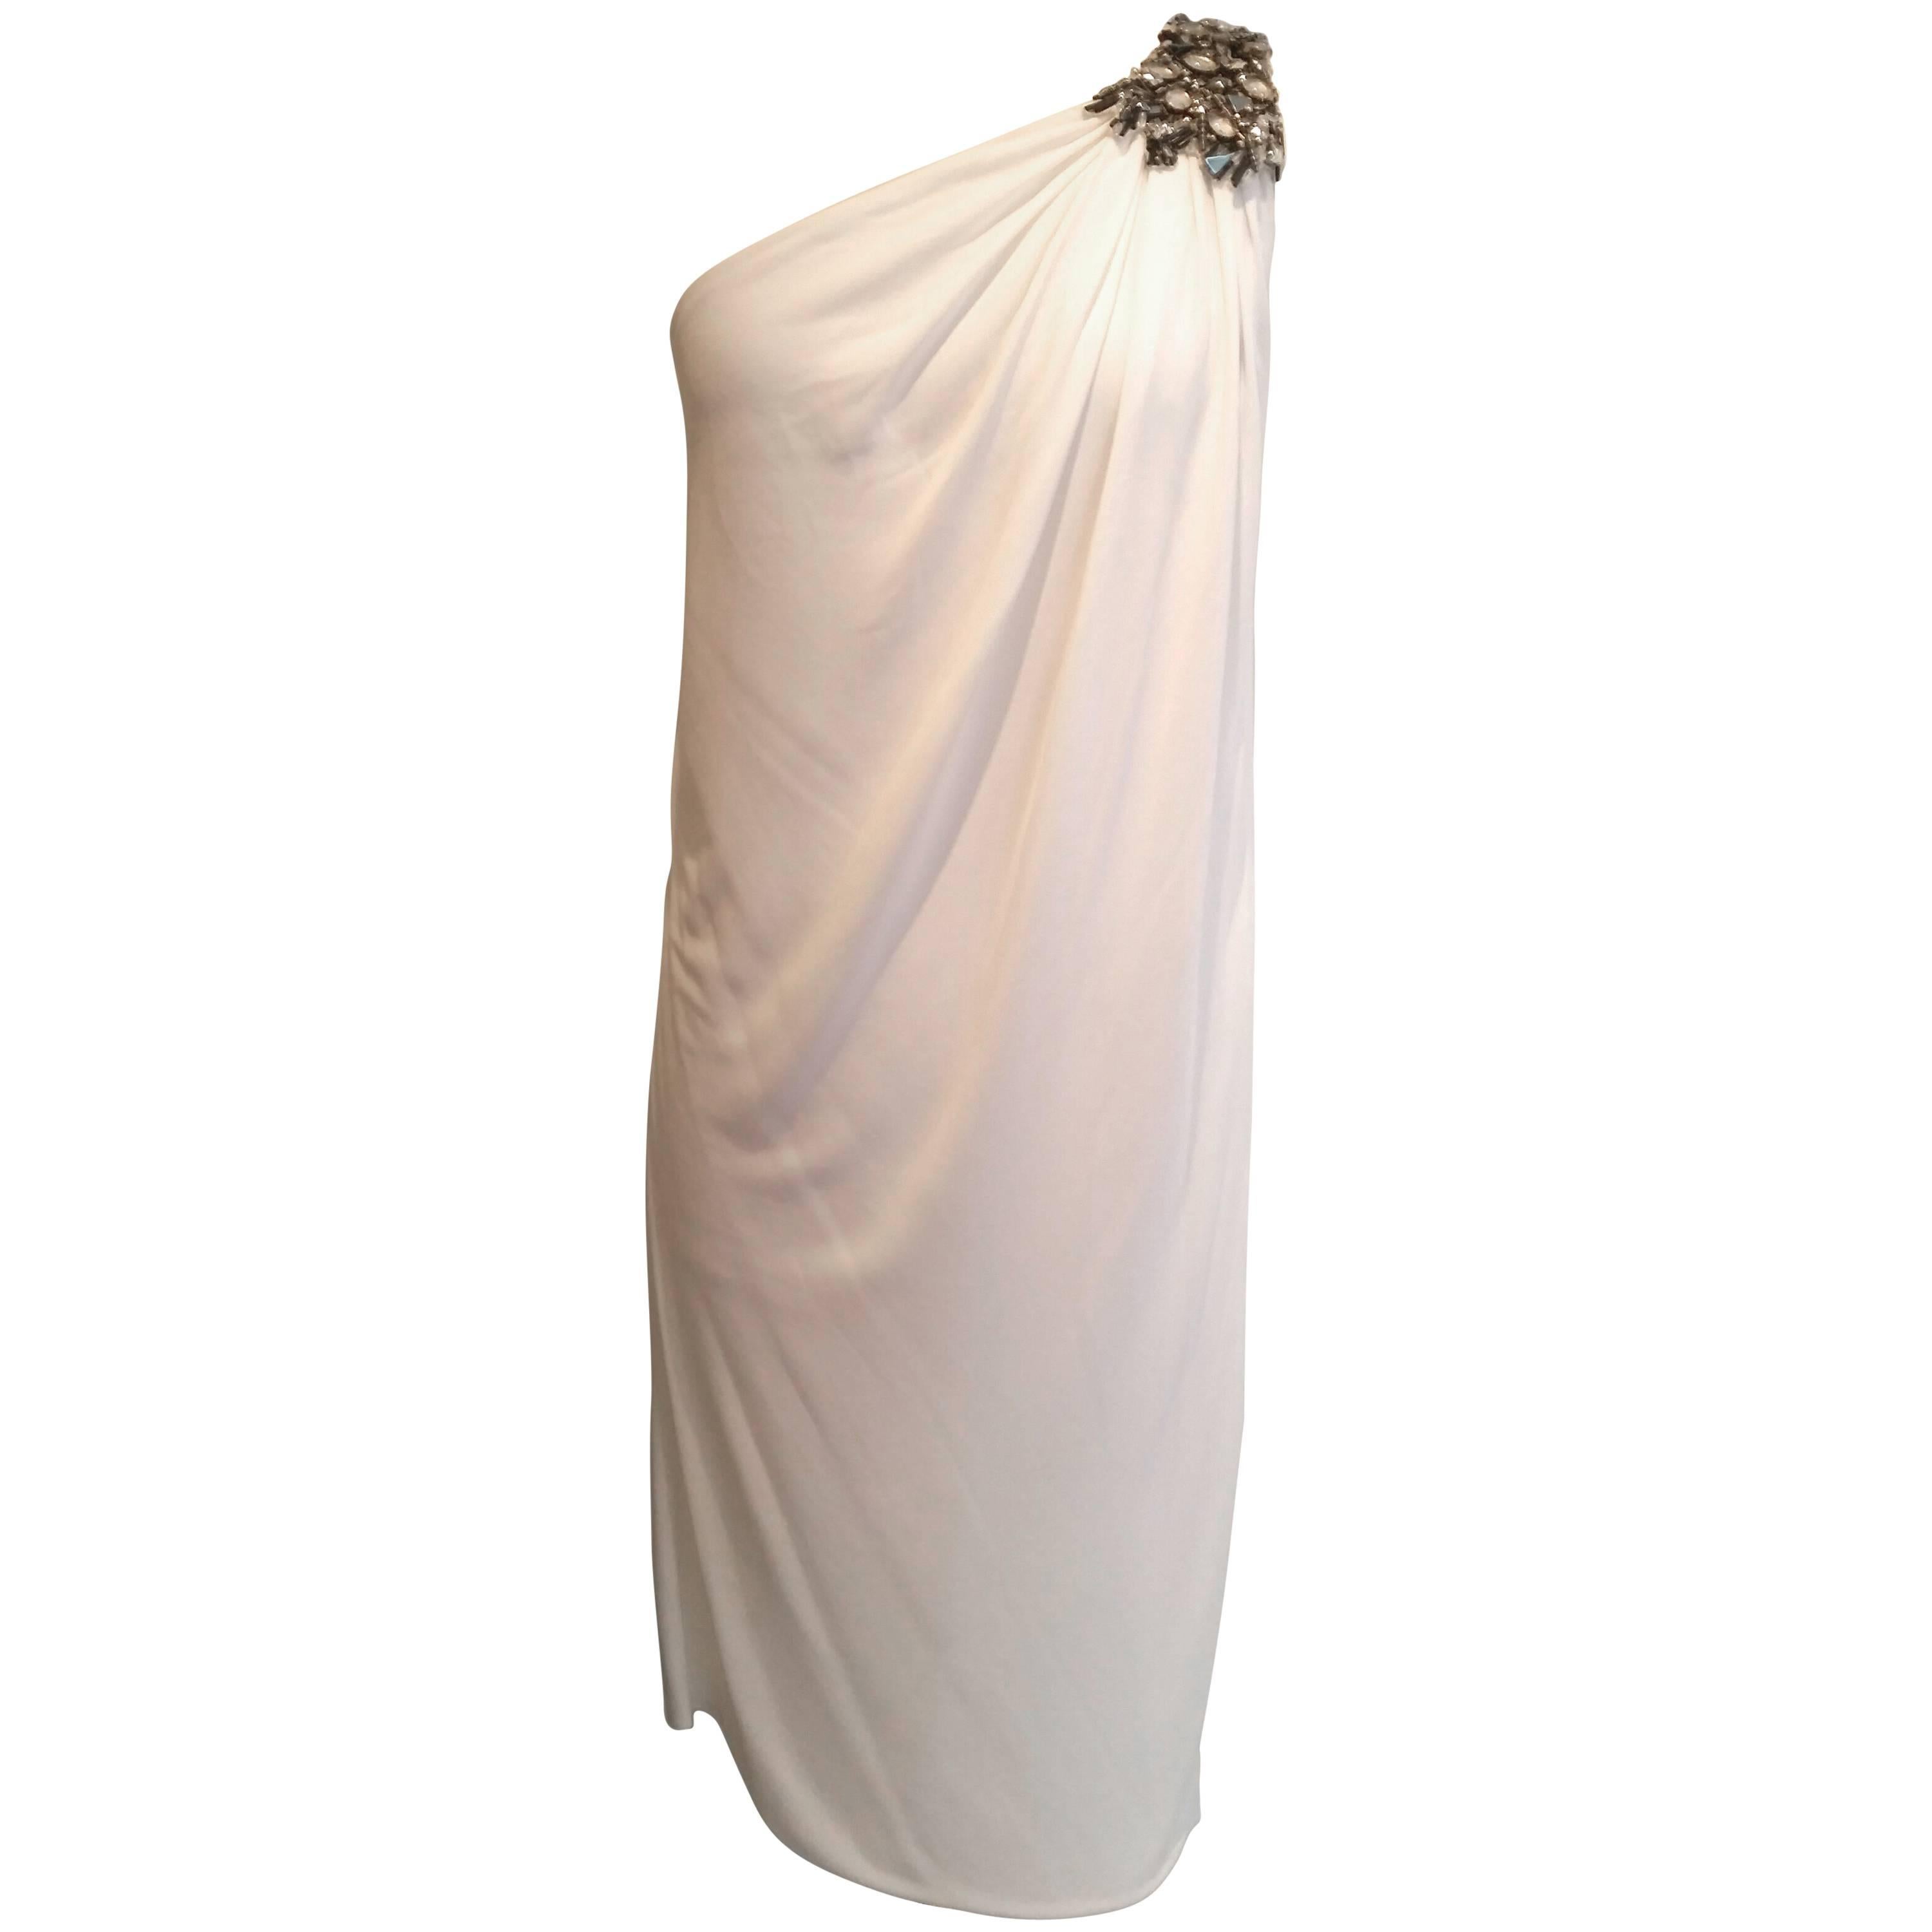 White Grecian style one shoulder cocktail dress For Sale